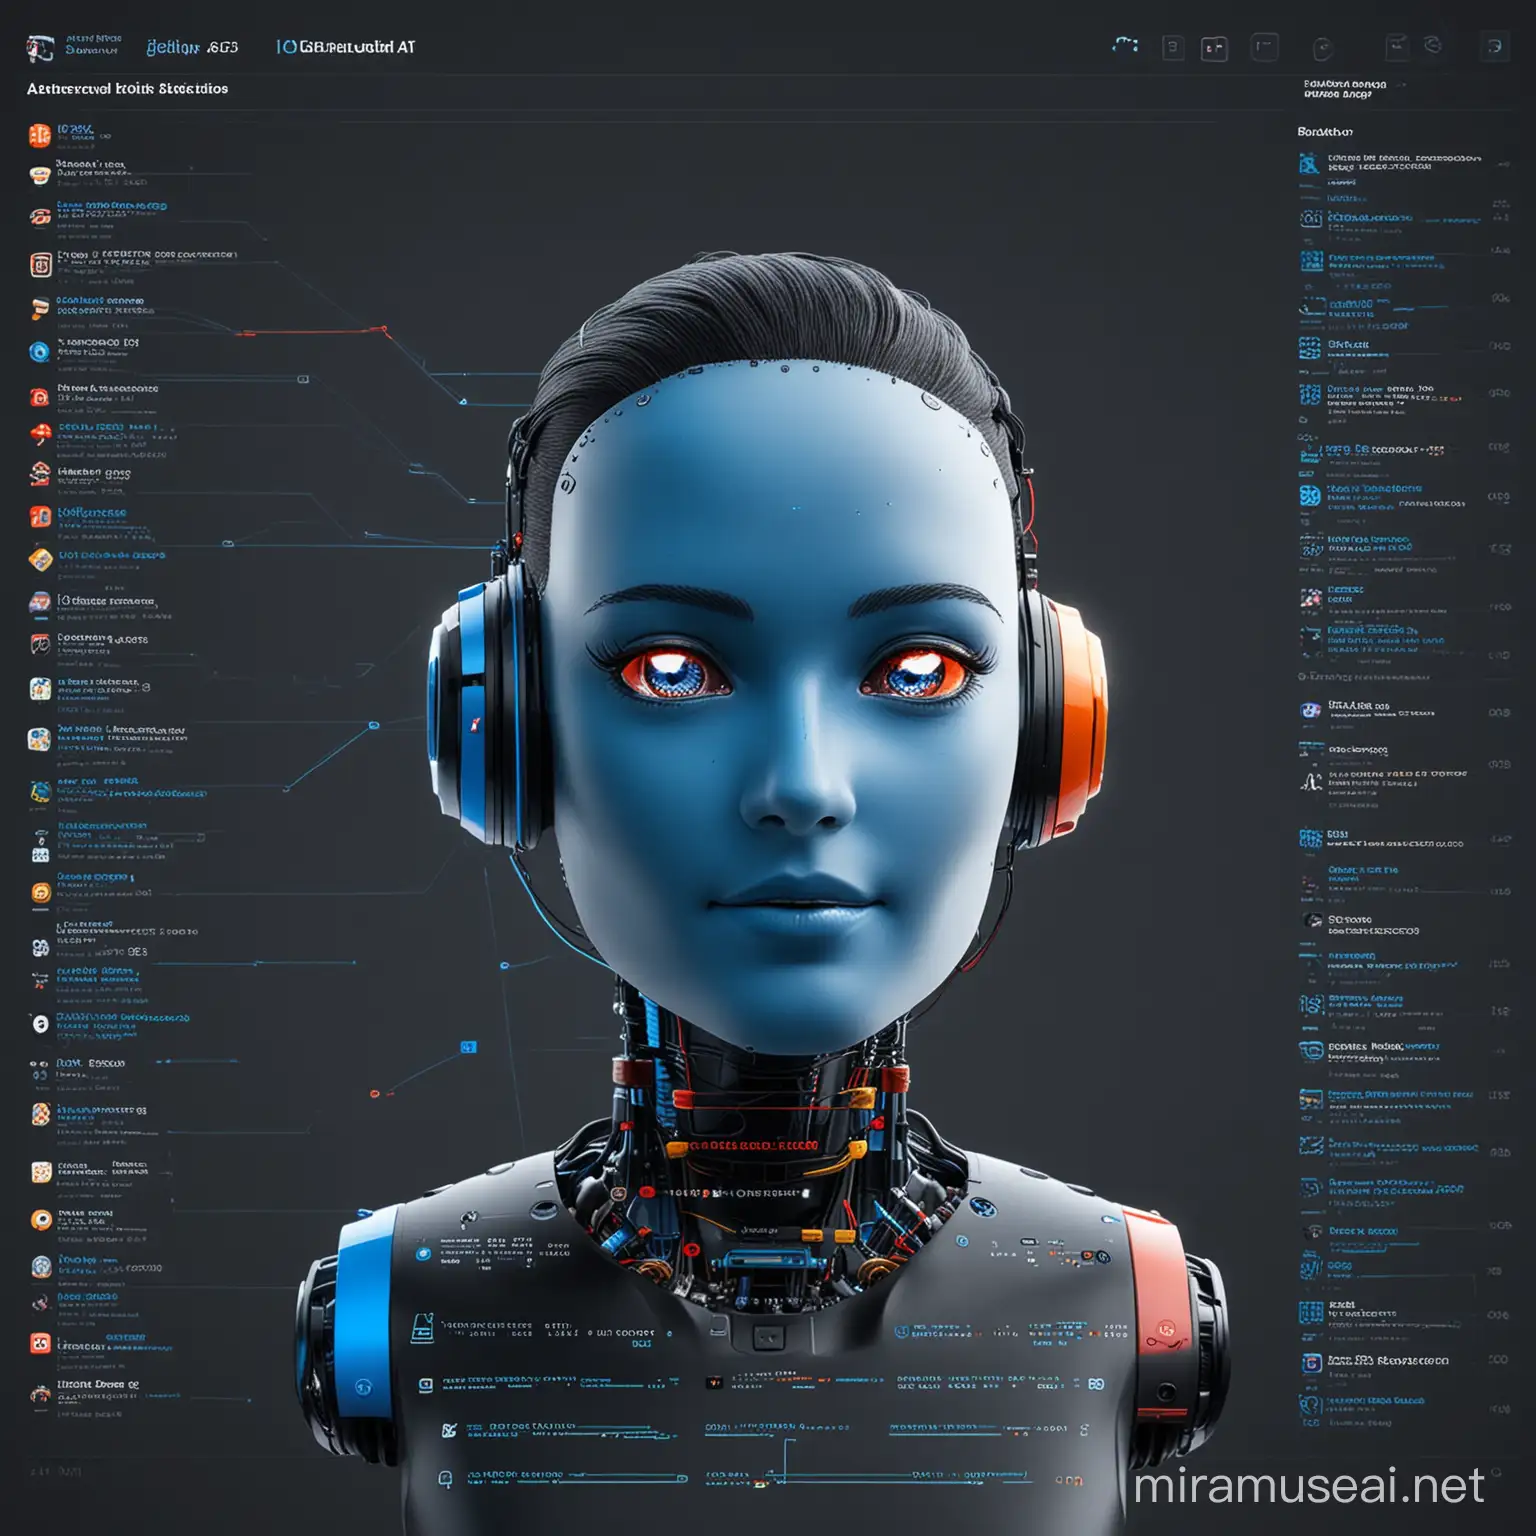 create a hyper realistic AI Software Chatbot design with the primary colors being Blue, black, white out lining, make the surrounding lines of code, workflow automations, and scalability charts